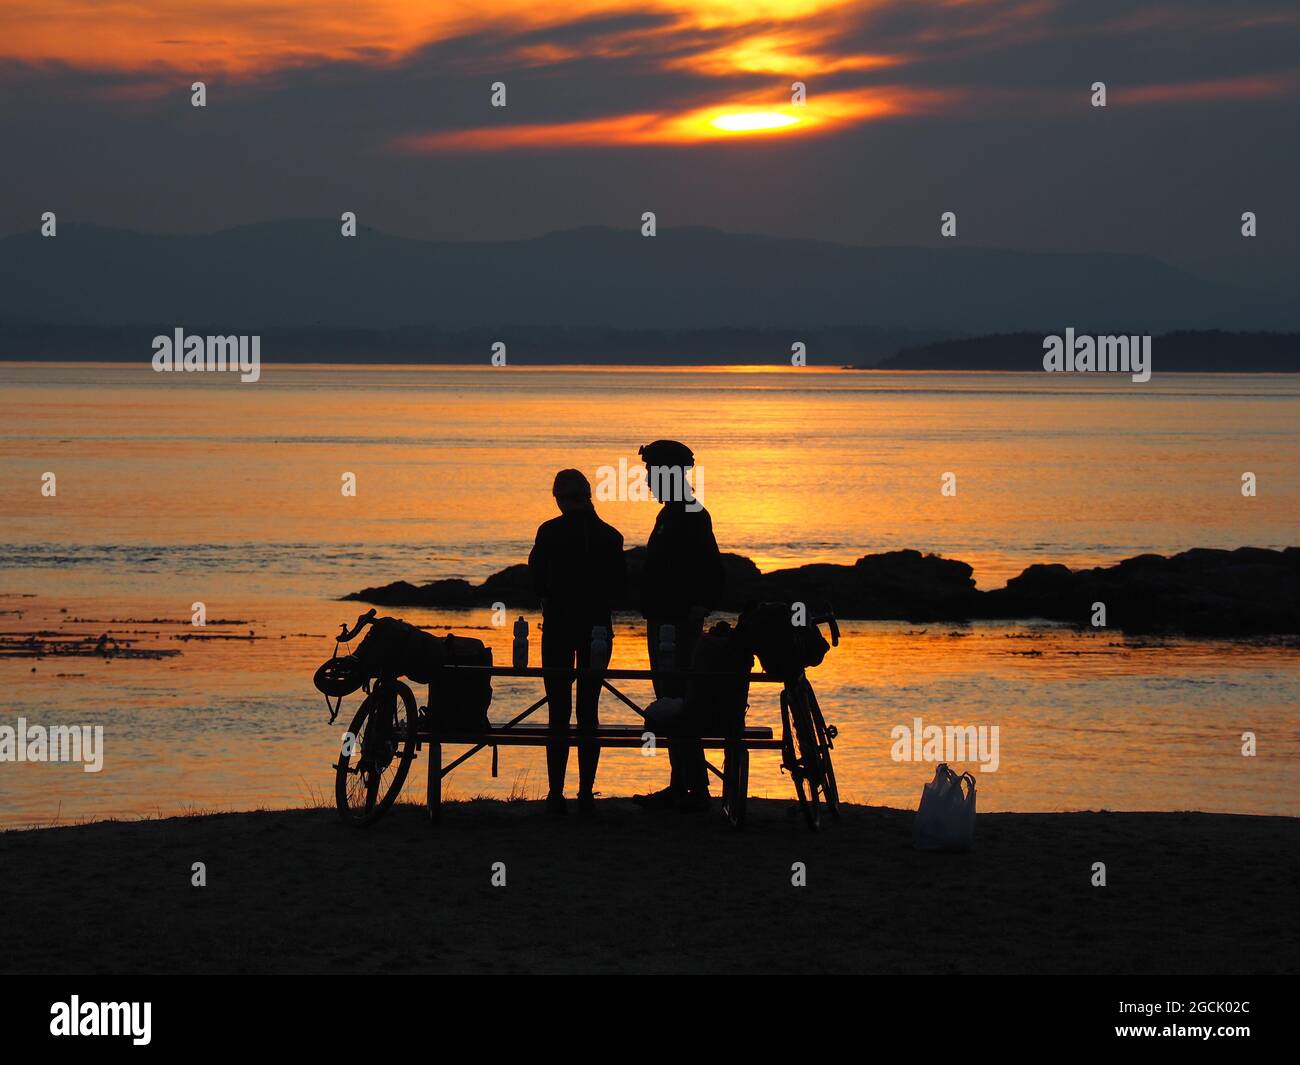 ORKA ISLAND, UNITED STATES - Aug 22, 2019: A couple with their bicycles enjoys the beautiful sunset at the beach while Stock Photo